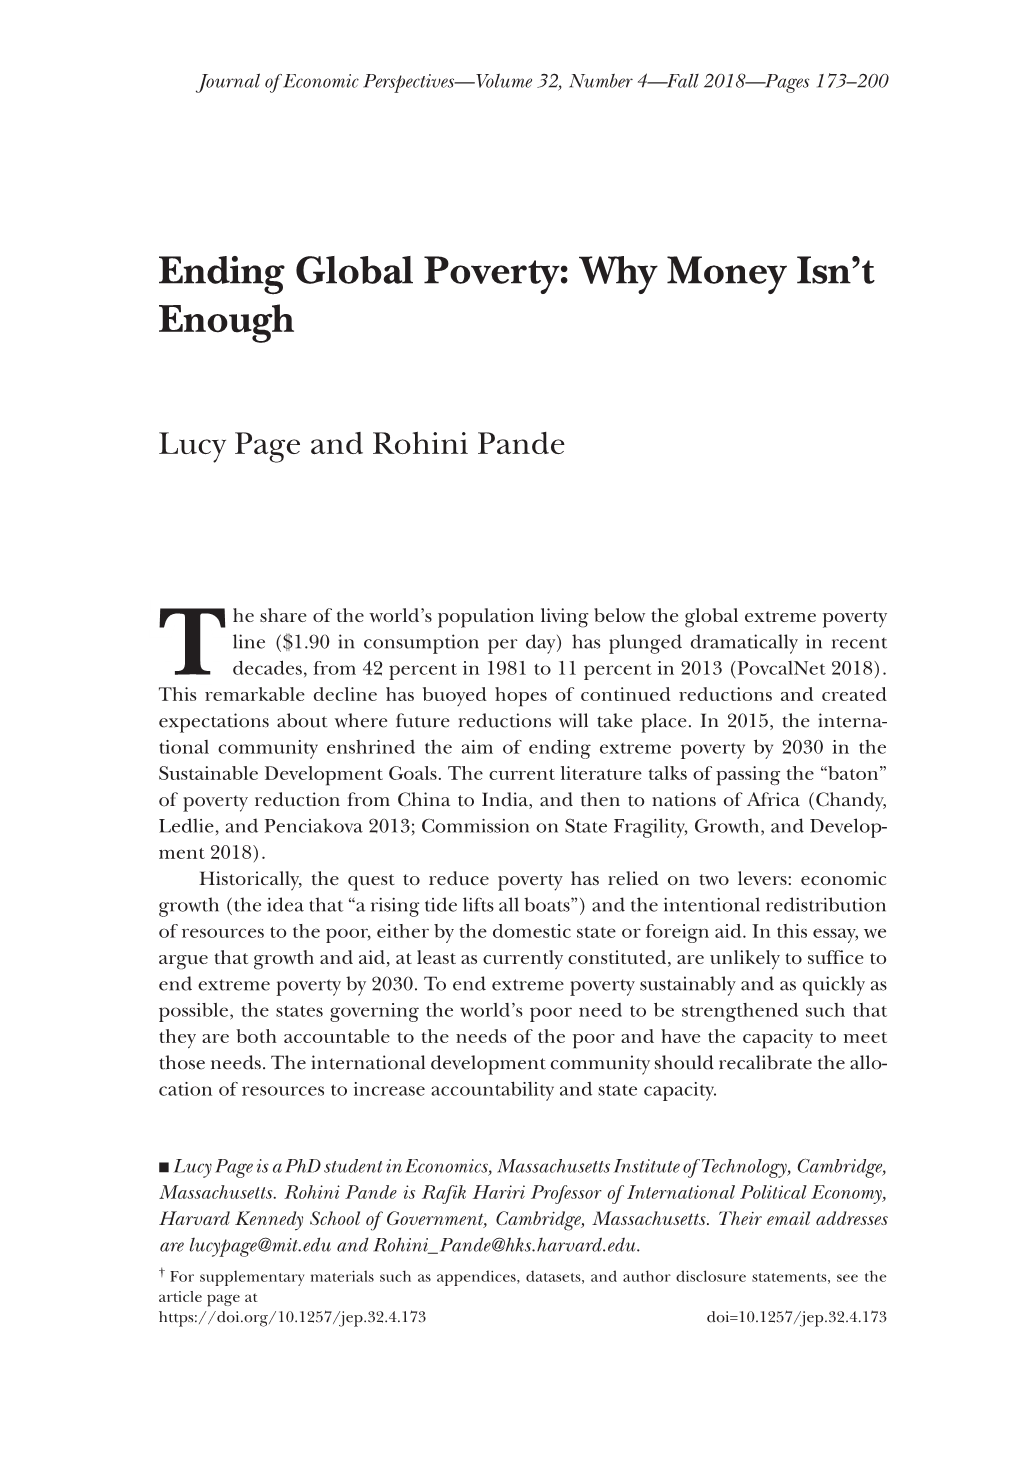 Ending Global Poverty: Why Money Isn't Enough